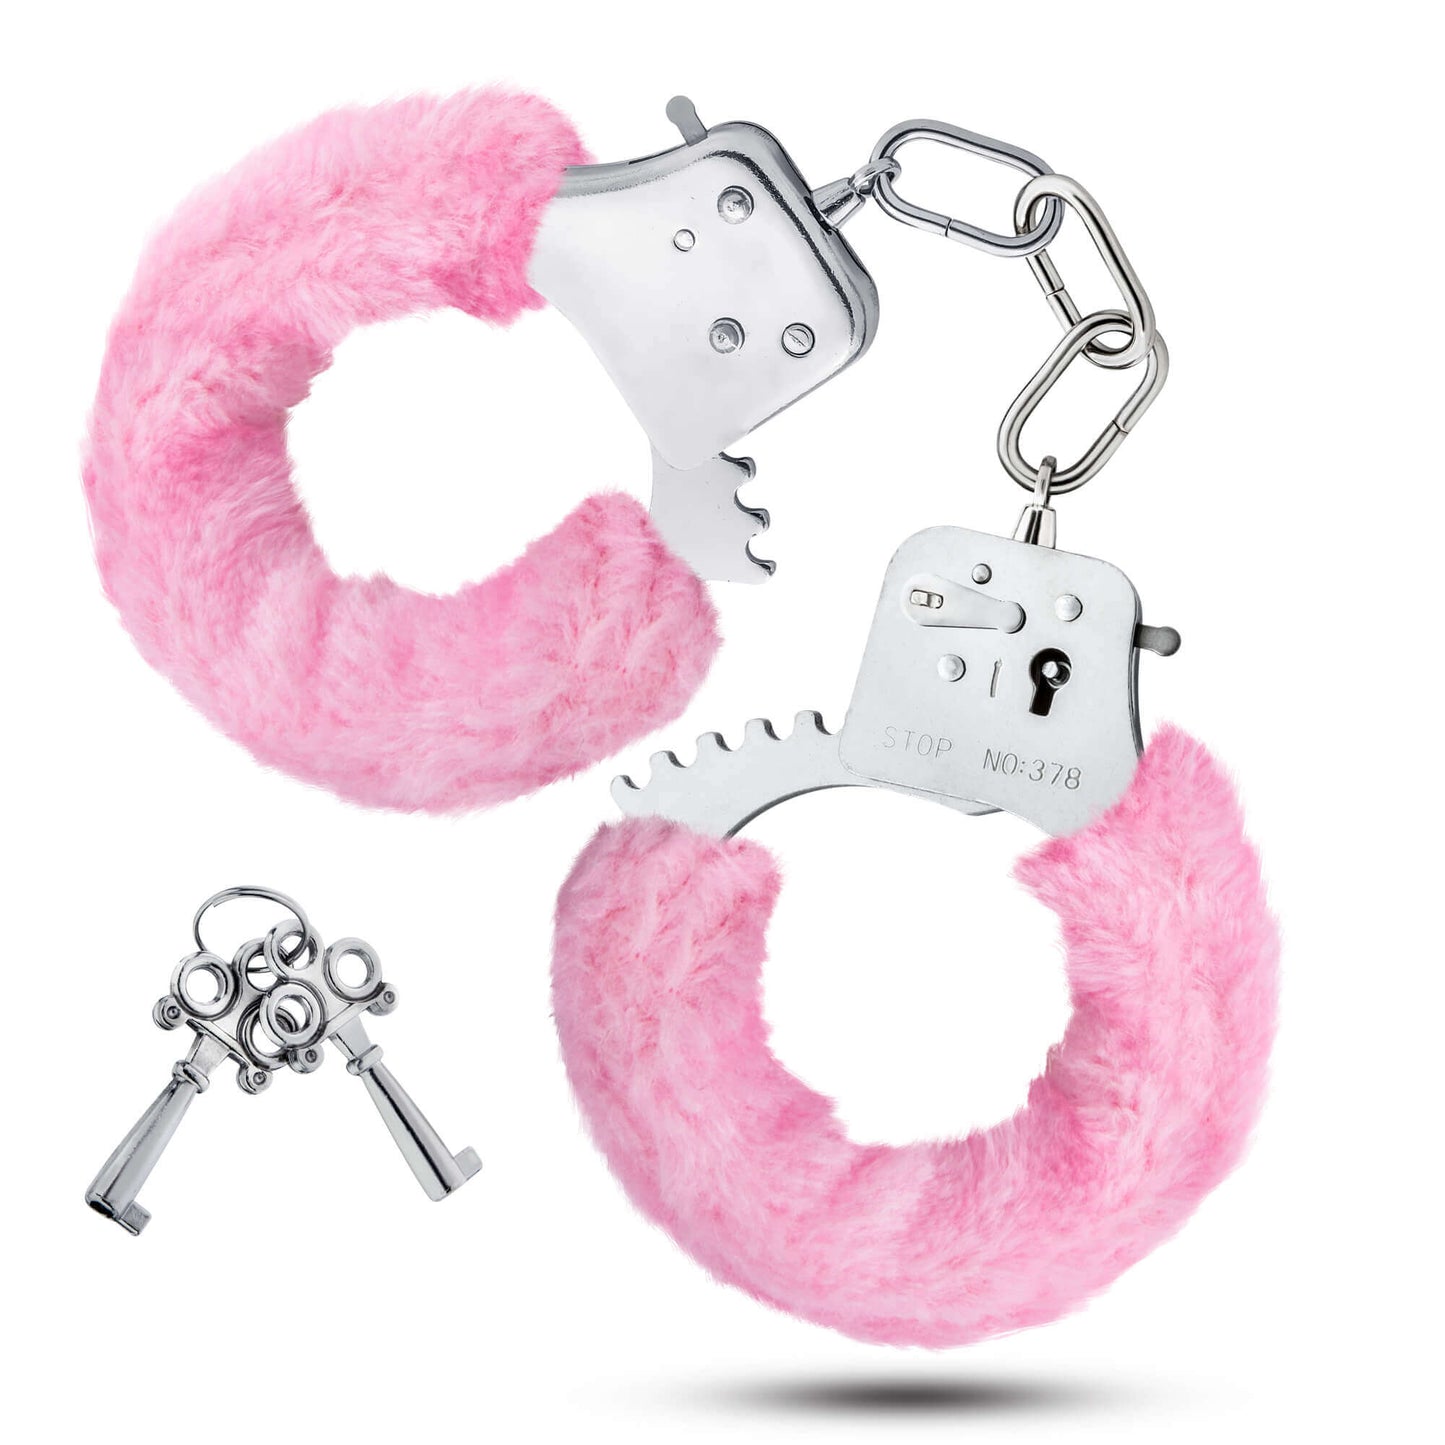 Temptasia Cuffs in pink - Blush Novelties - by The Bigger O - an online sex toy shop. We ship to USA, Canada and the UK.